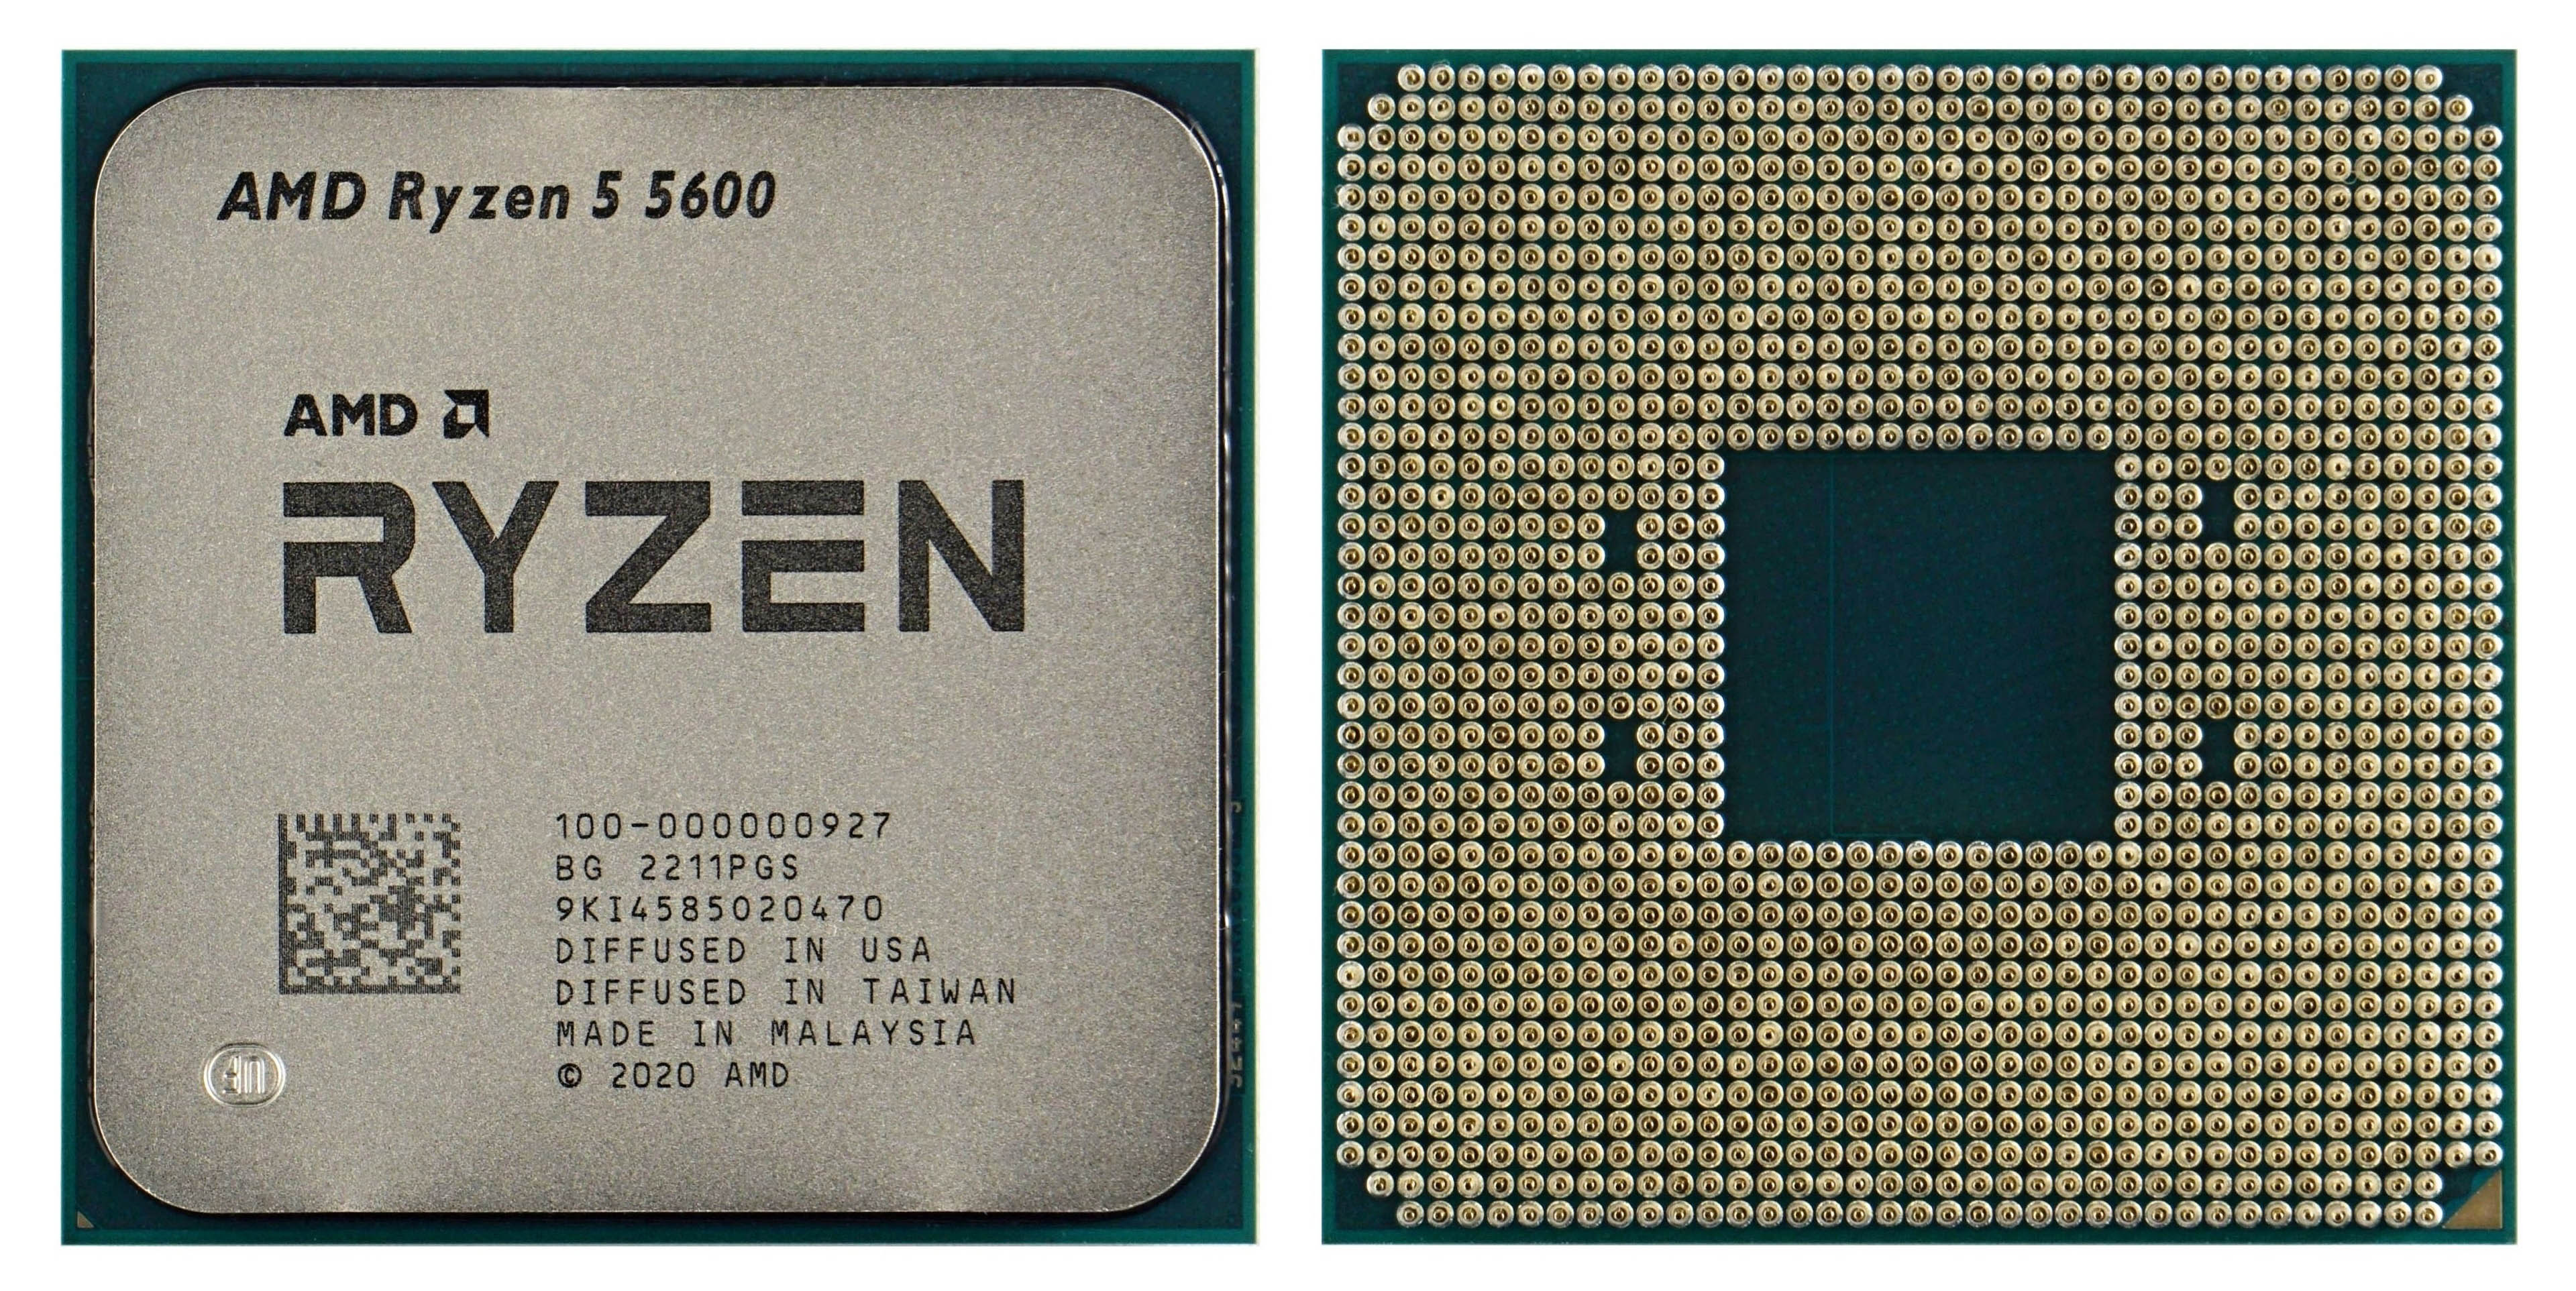 The Ryzen 5600 is much better value than the 5600X - especially